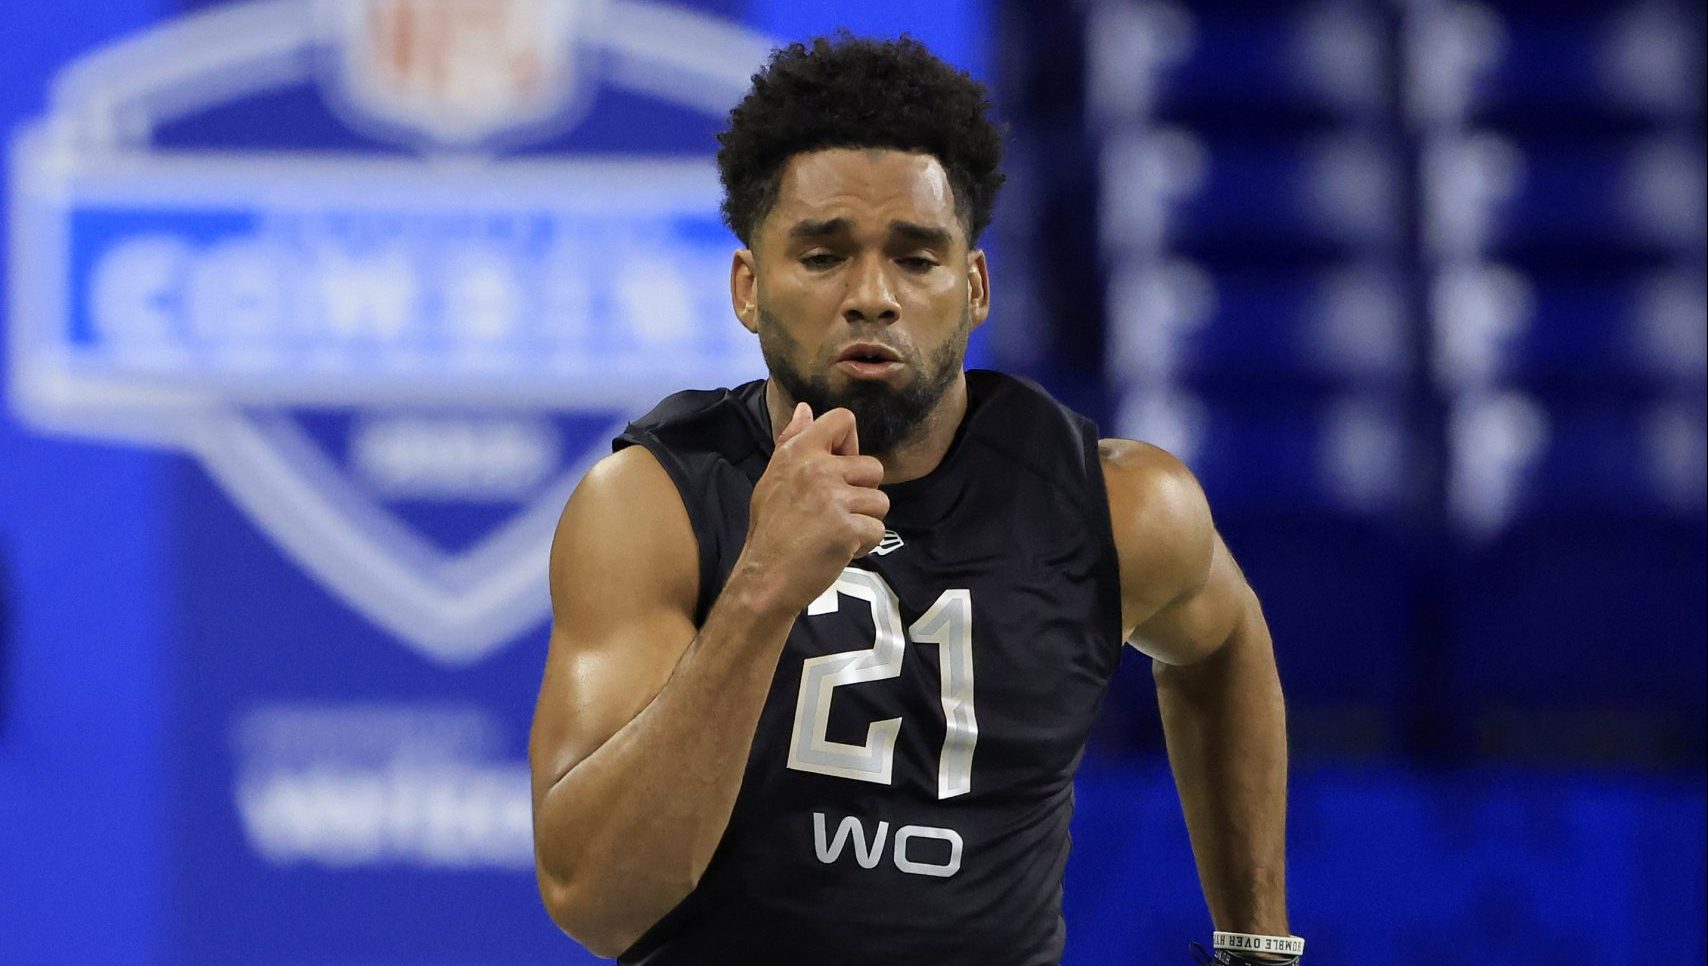 Chris Olave #WO21 of Ohio State runs the 40 yard dash during the NFL Scouting Combine at Lucas Oil ...